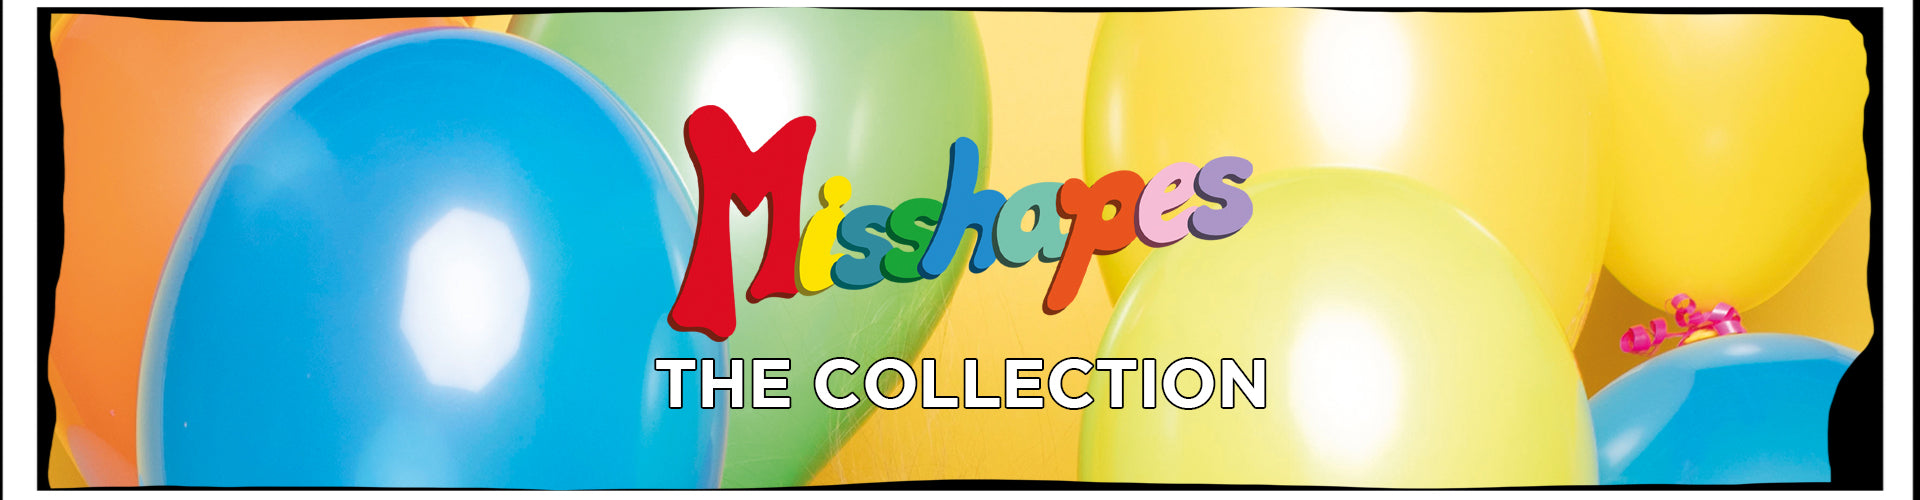 Misshapes: The Collection